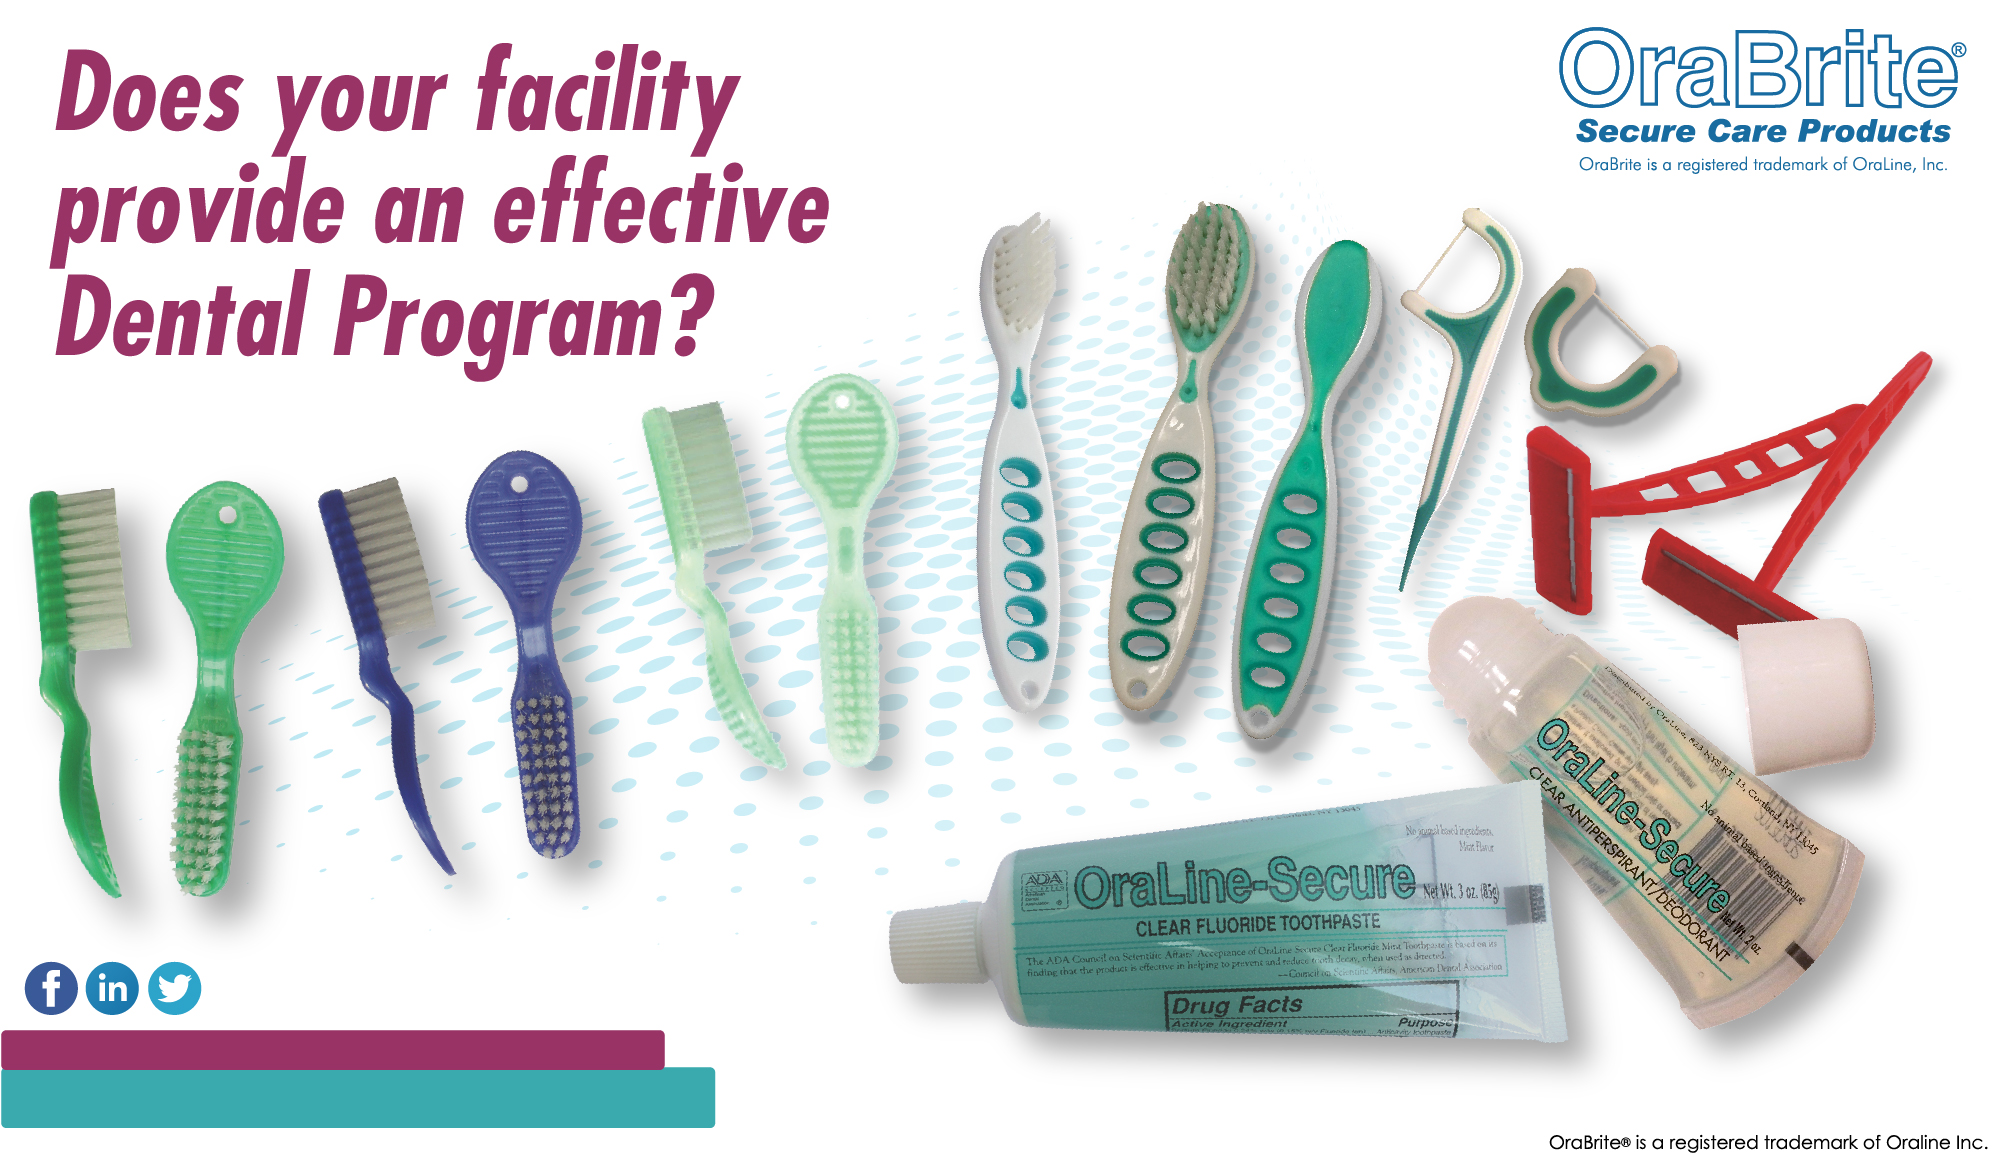 Does your facility provide an effective dental program?